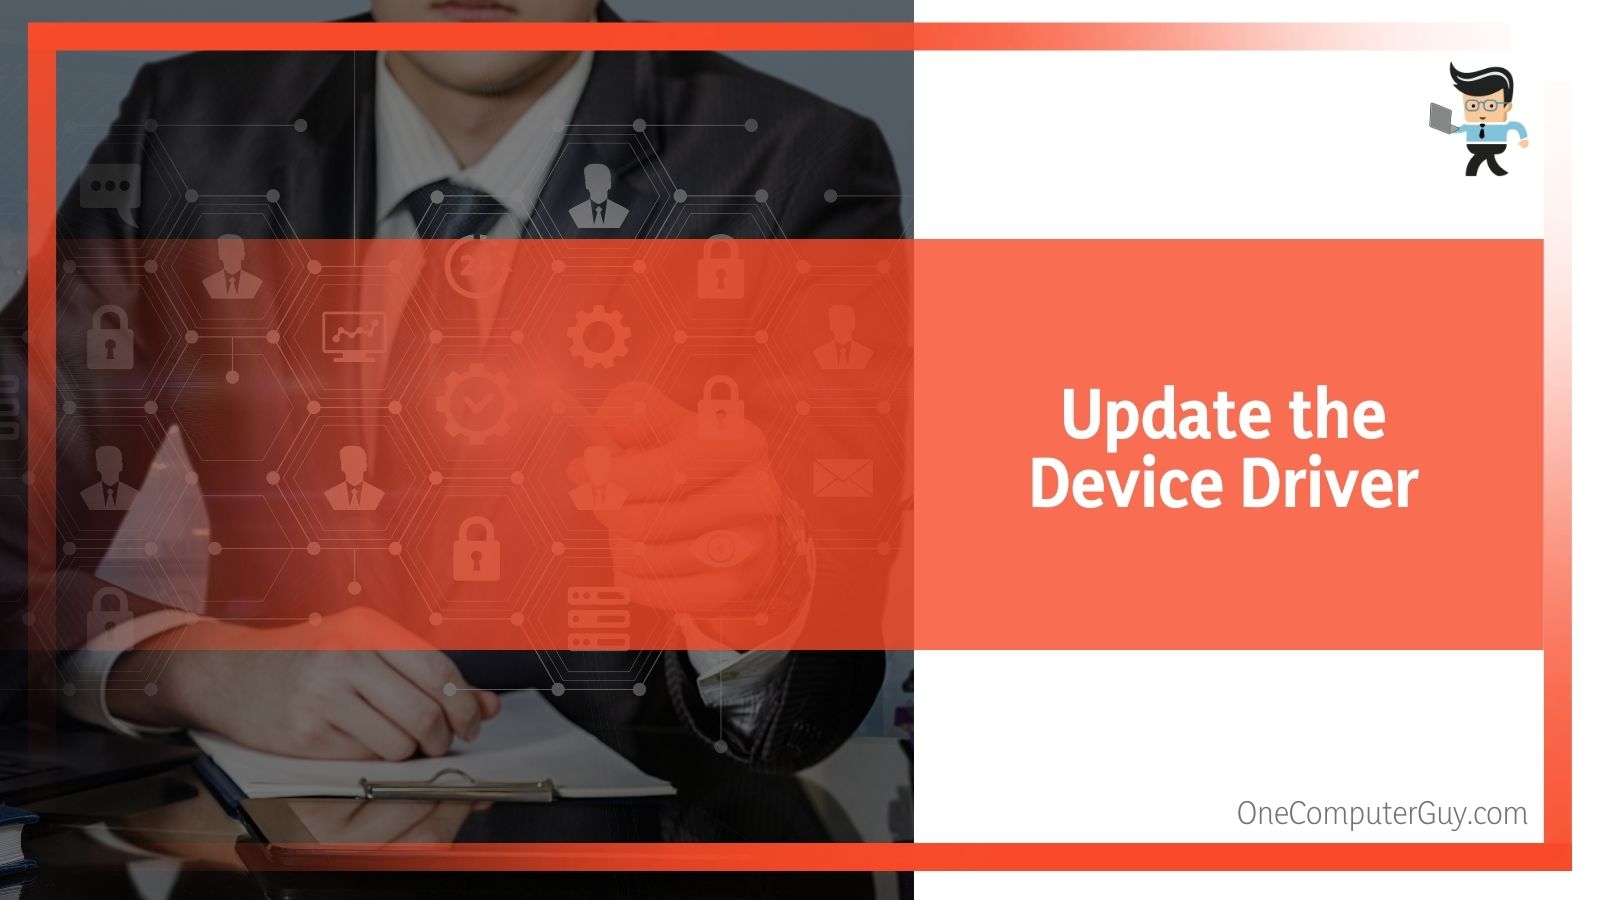 Update the Device Driver